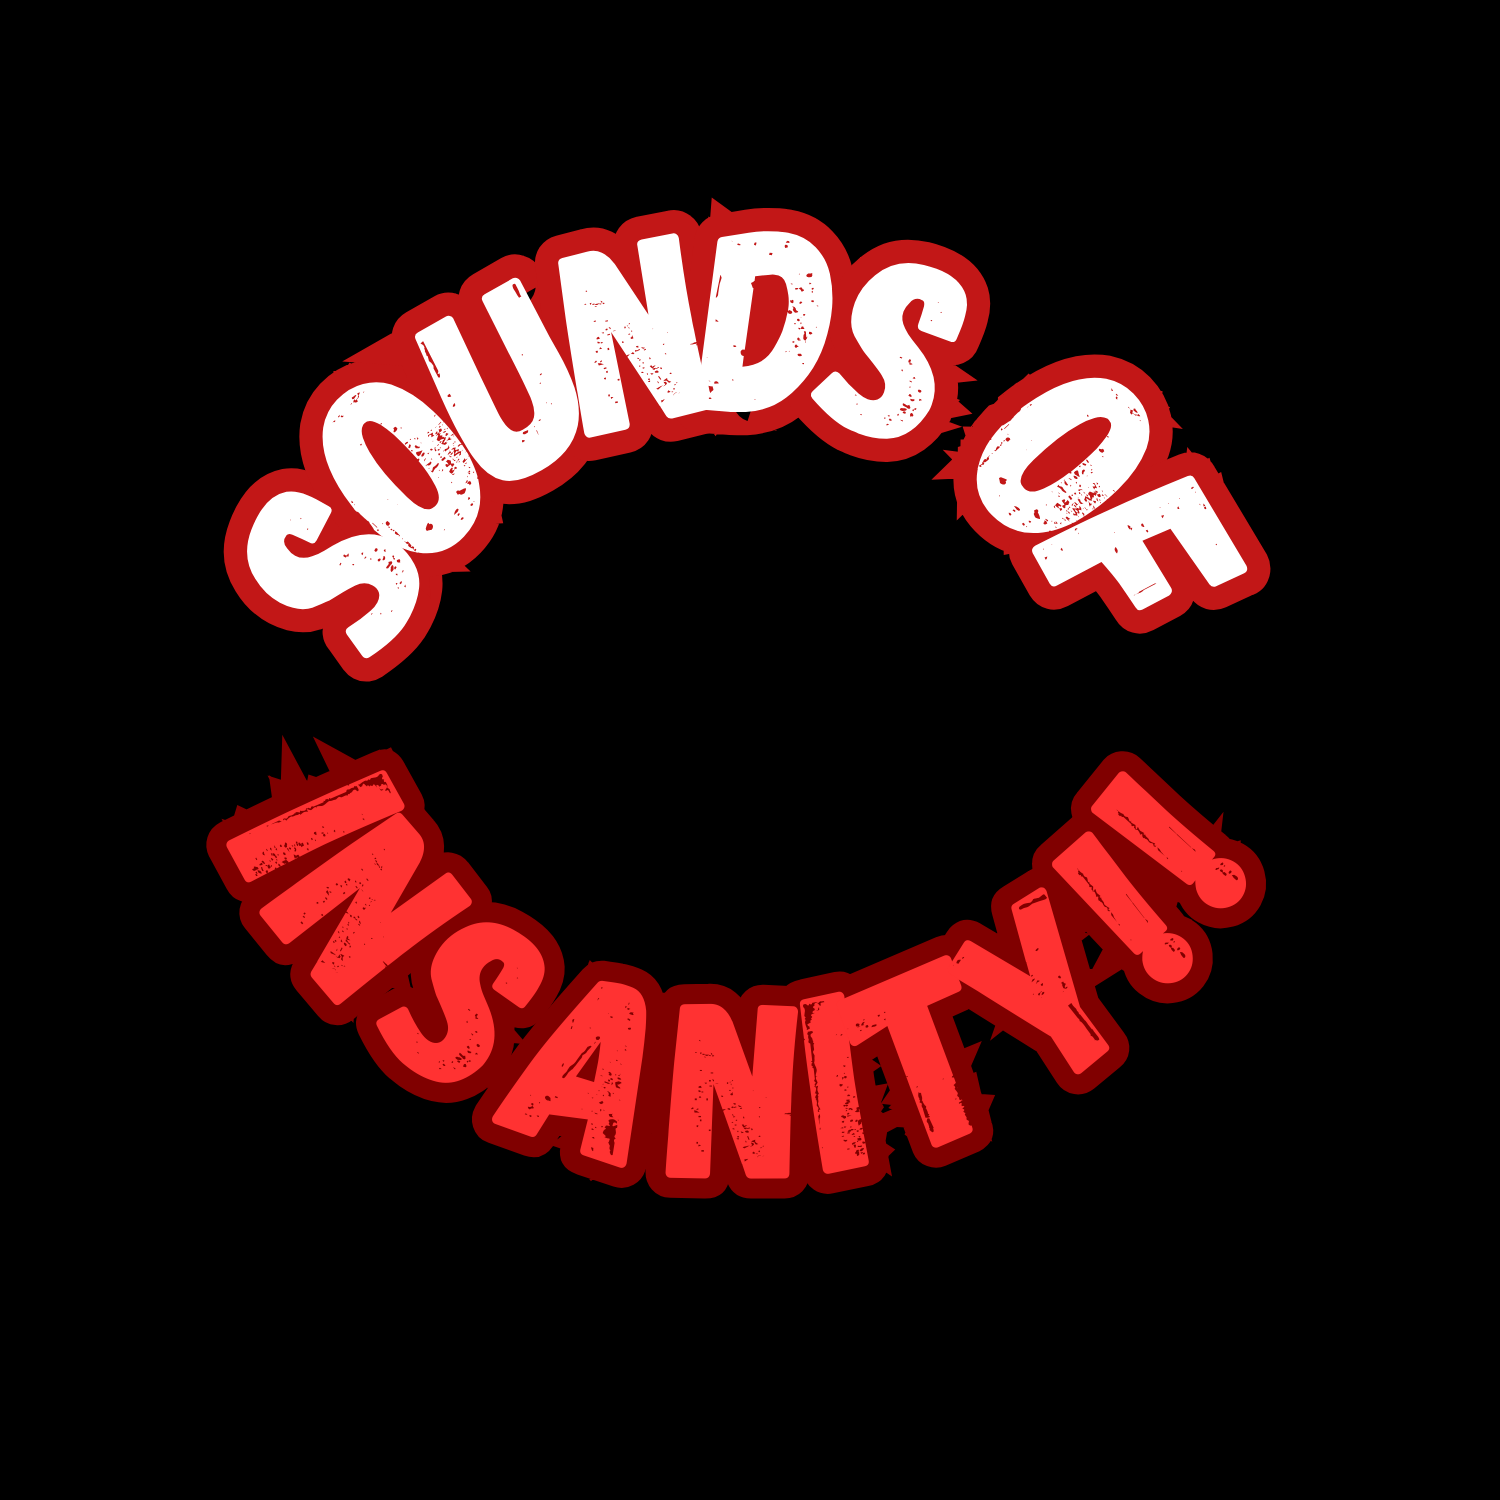 Art for Mentally Stable by Sounds Of Insanity